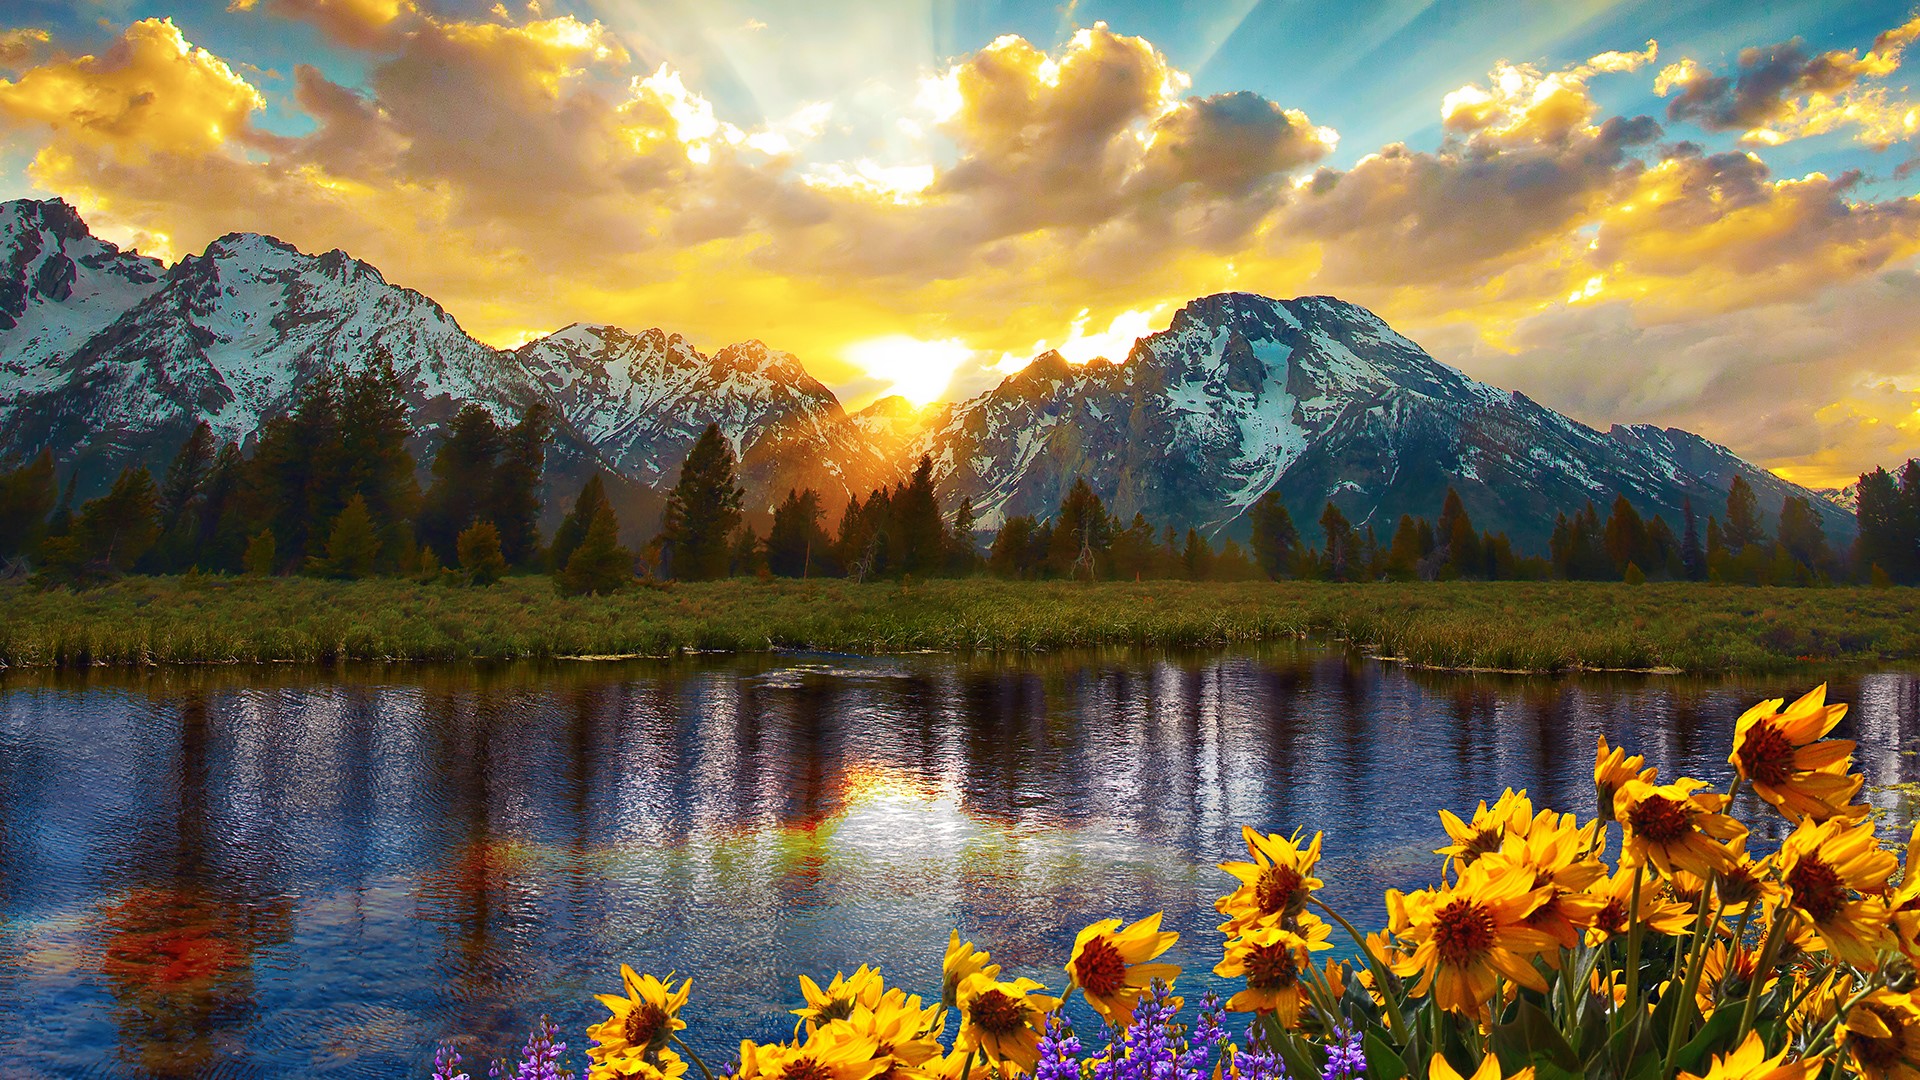 Nature Landscape Flowers Clouds Sky Mountains Sun Rays Sunflowers River Grand Teton National Park Wy 1920x1080